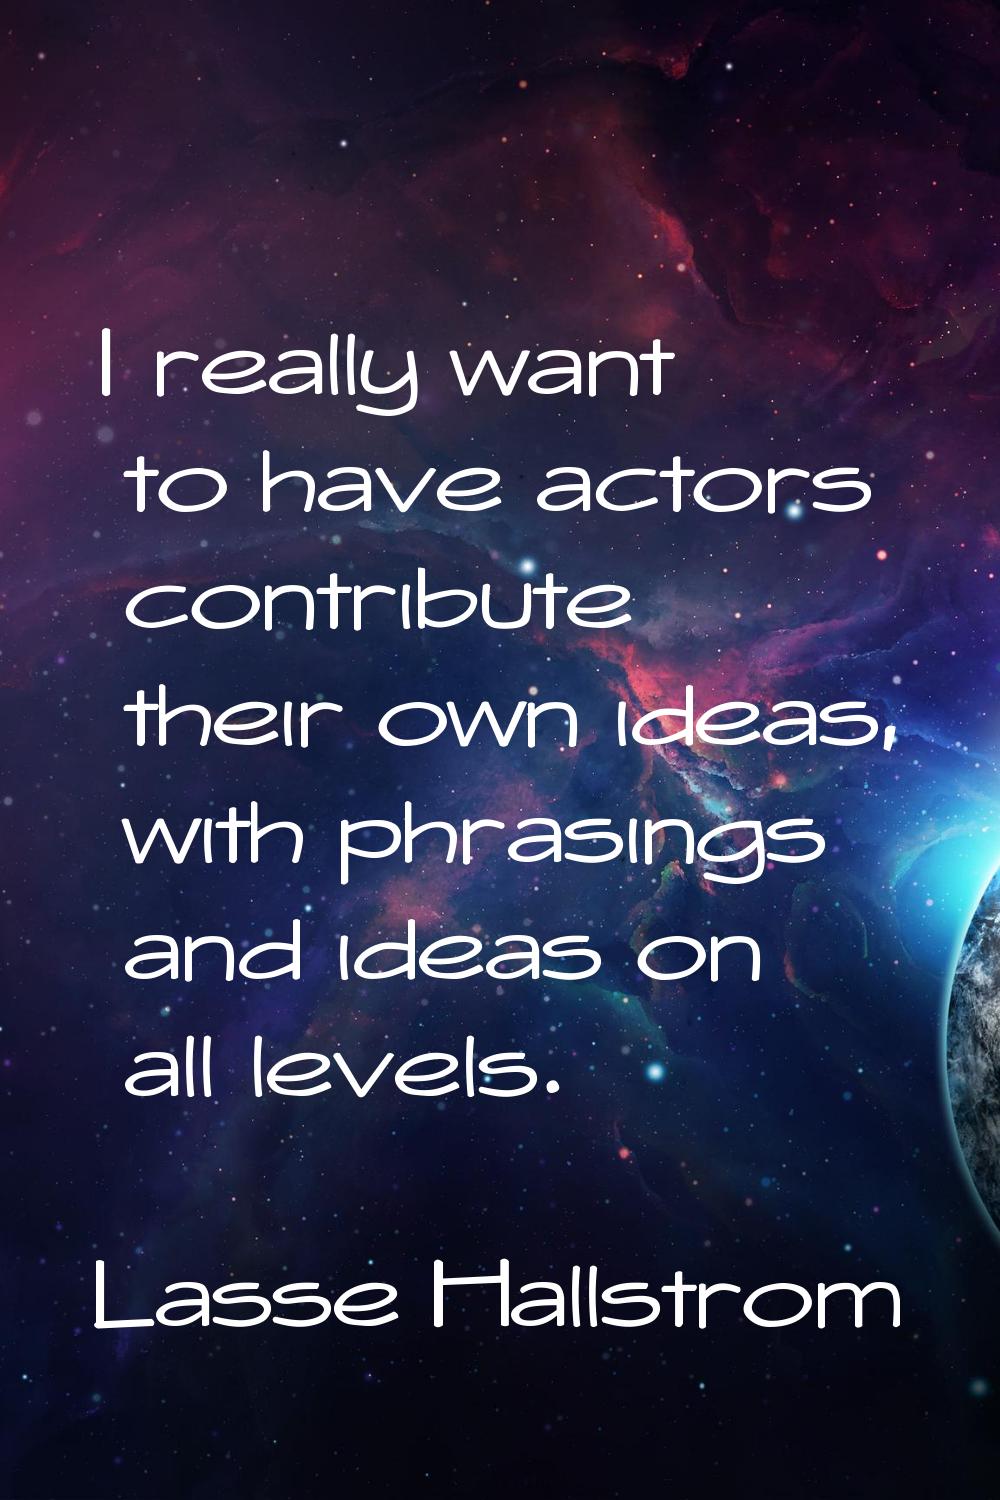 I really want to have actors contribute their own ideas, with phrasings and ideas on all levels.